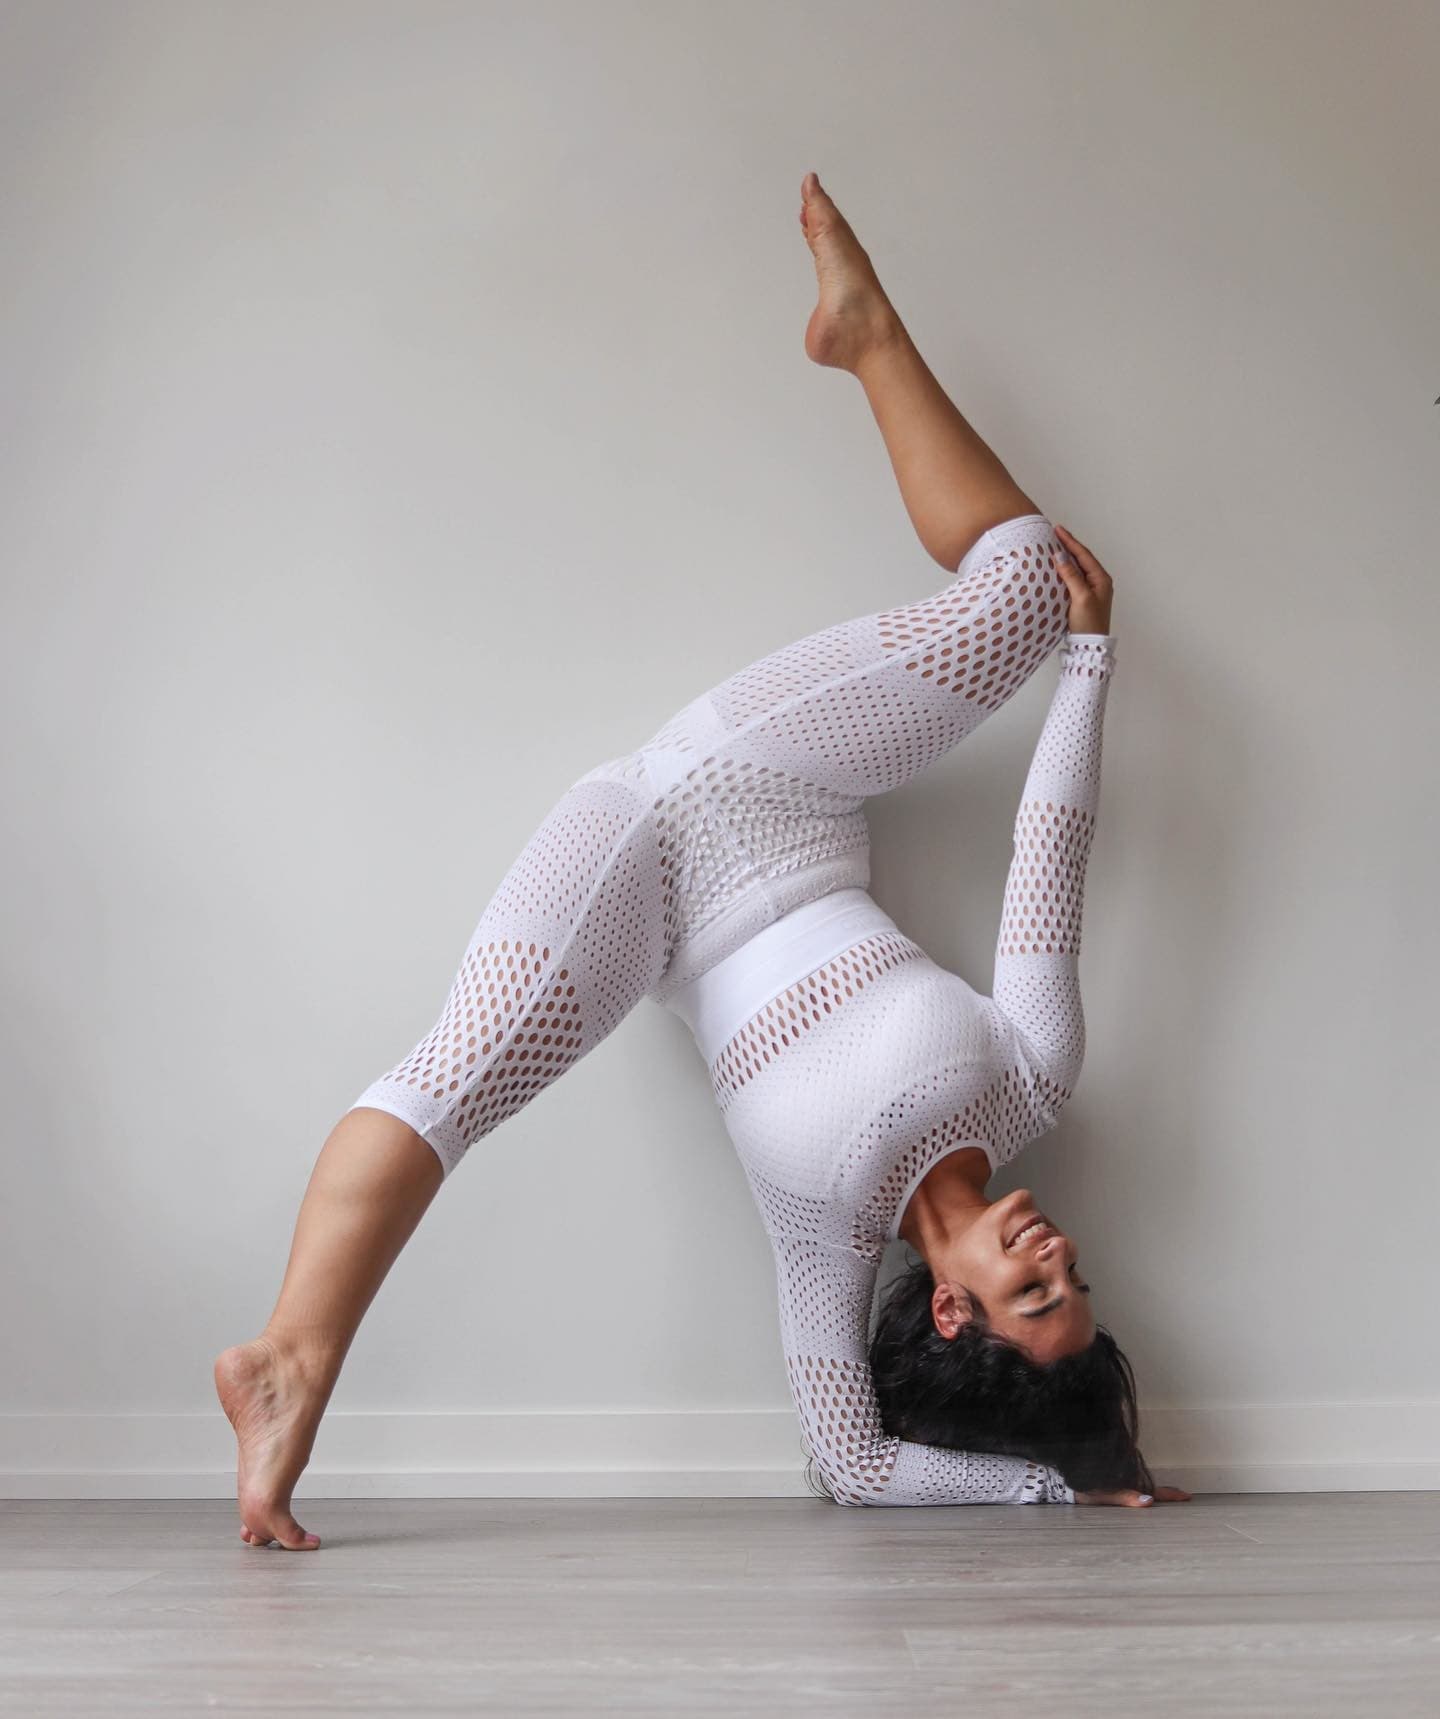 @asanavanessa wearing a Haute Mesh Summer Long Sleeve in White with a matching pair of Mesh High Waist Haute Summer Capris while posing against a white wall in a single forearm stand.  